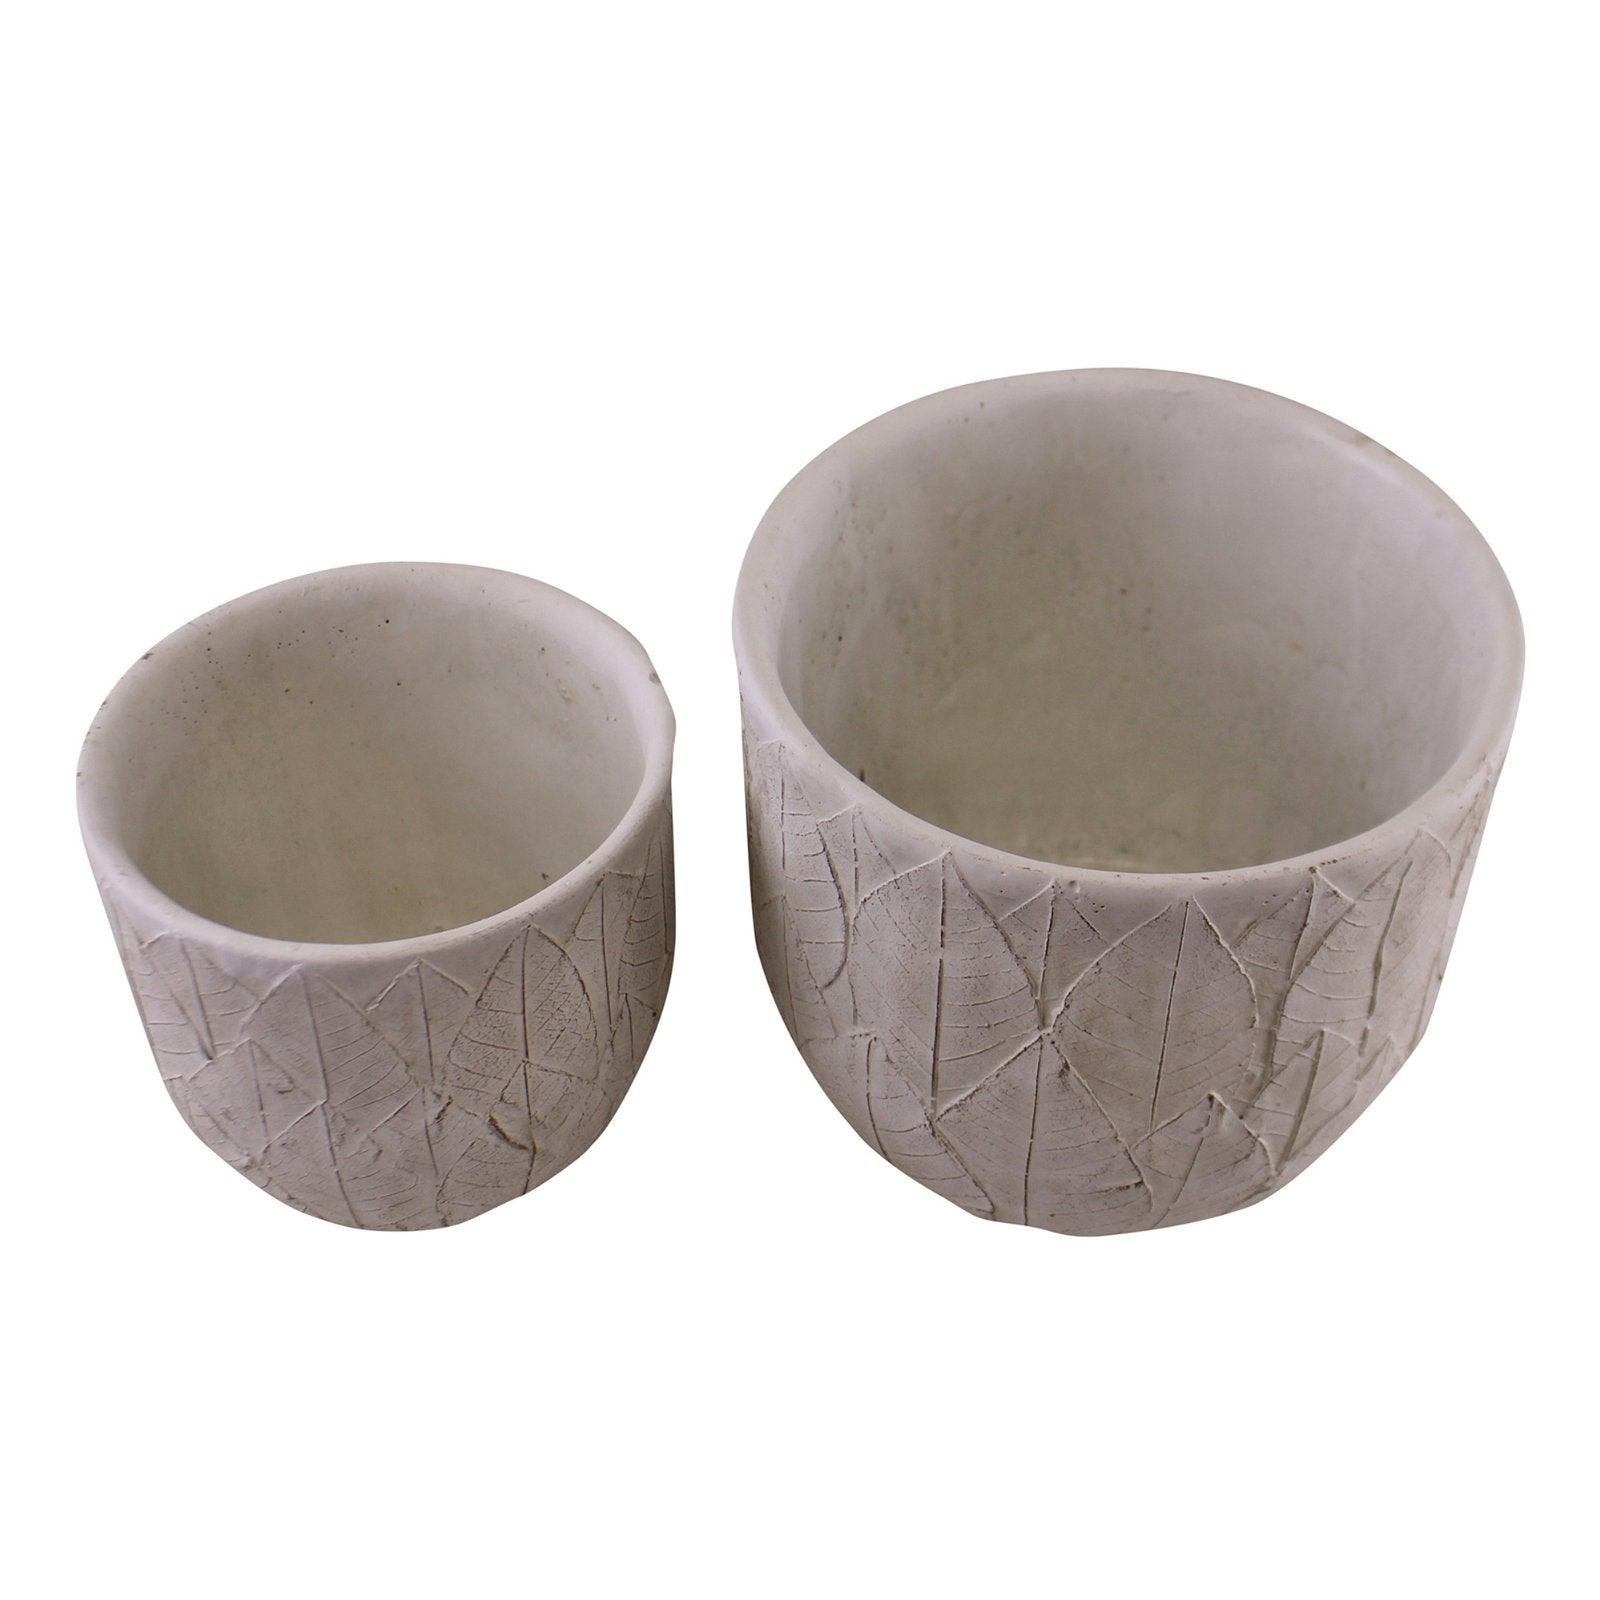 View Set of 2 Cement Embossed Leaf Planters information